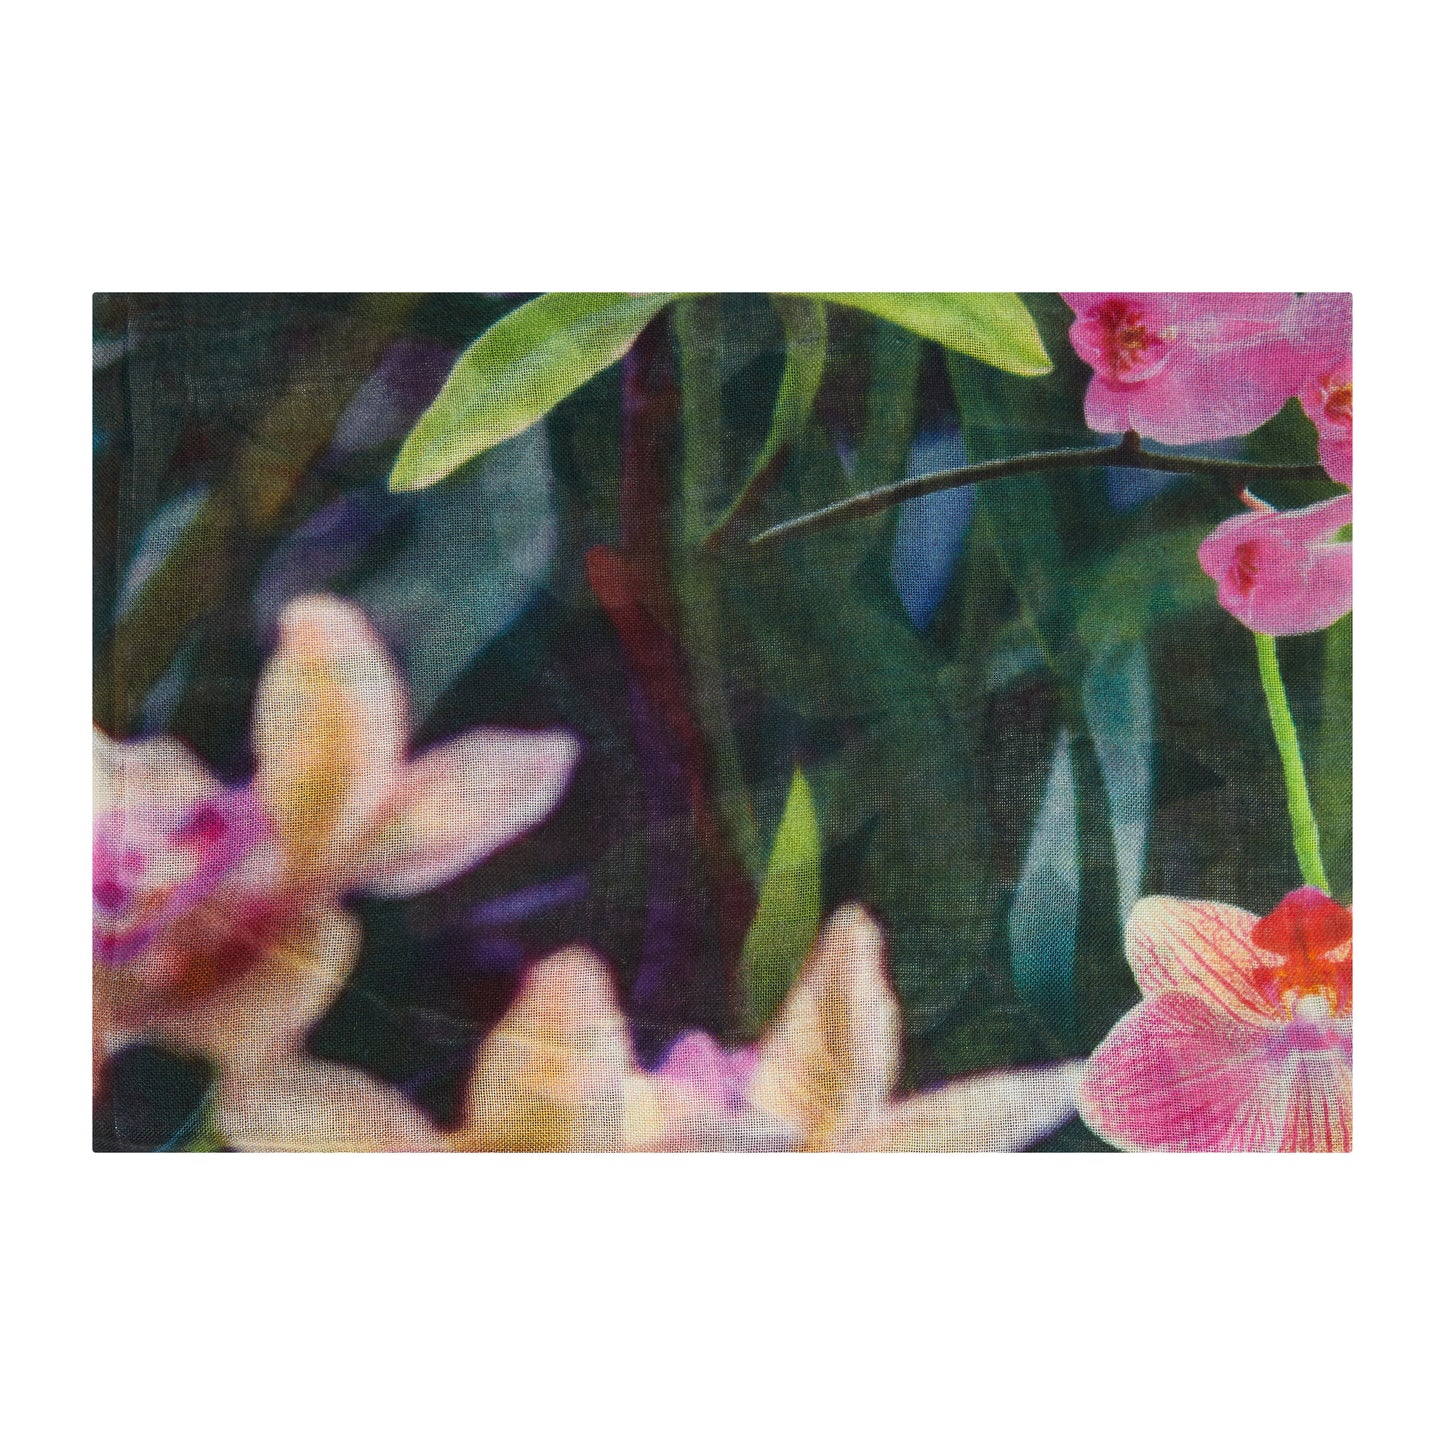 Silk/modal scarf with pink orchids design, based on photography from Cambridge University Botanic Garden.